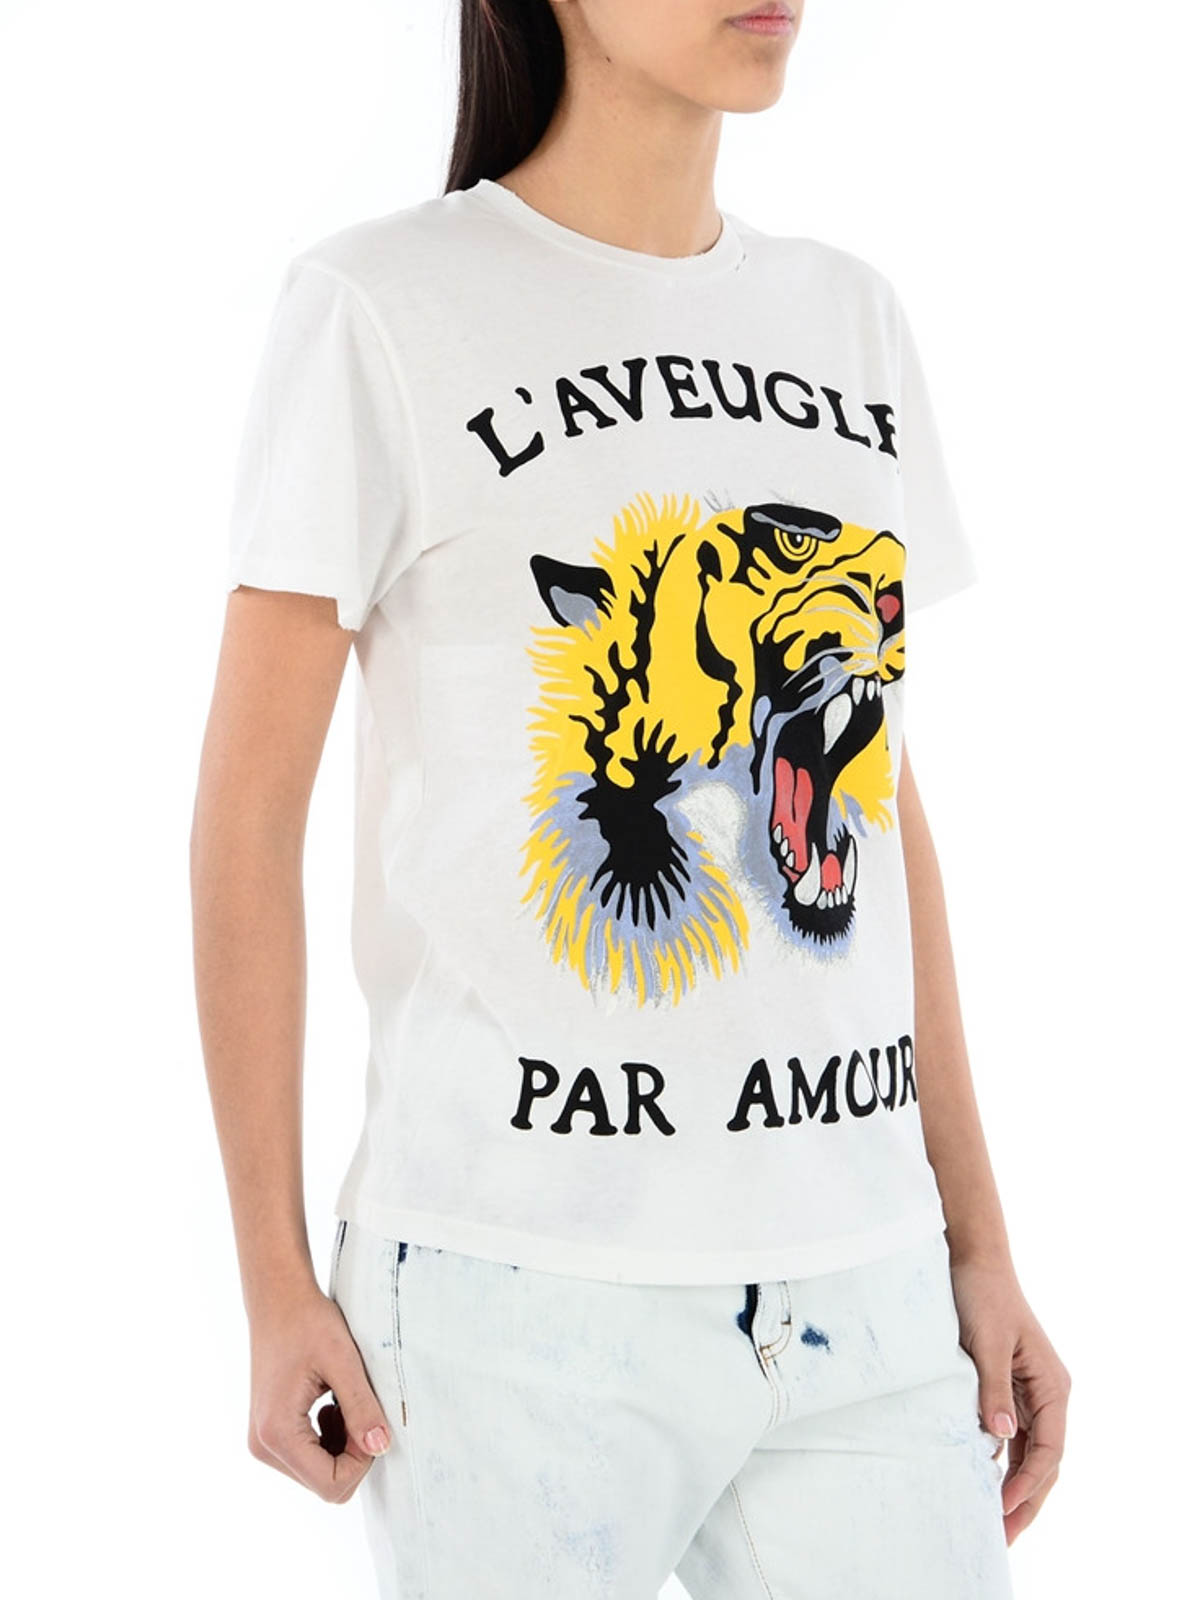 amour gucci t shirt